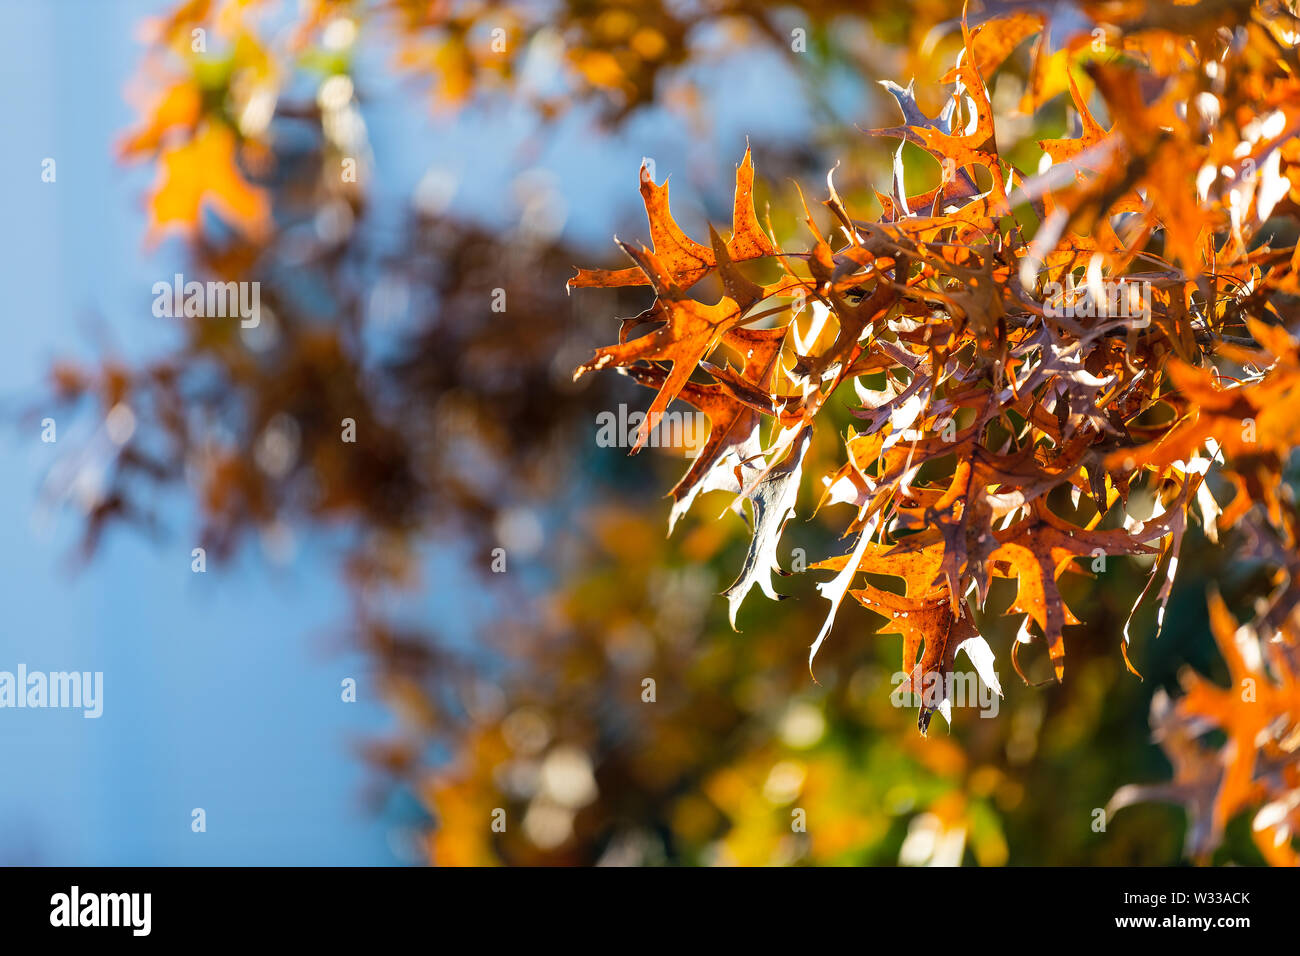 Virginia yellow orange autumn oak leaves looking up view of colorful foliage isolated against blue sky background Stock Photo